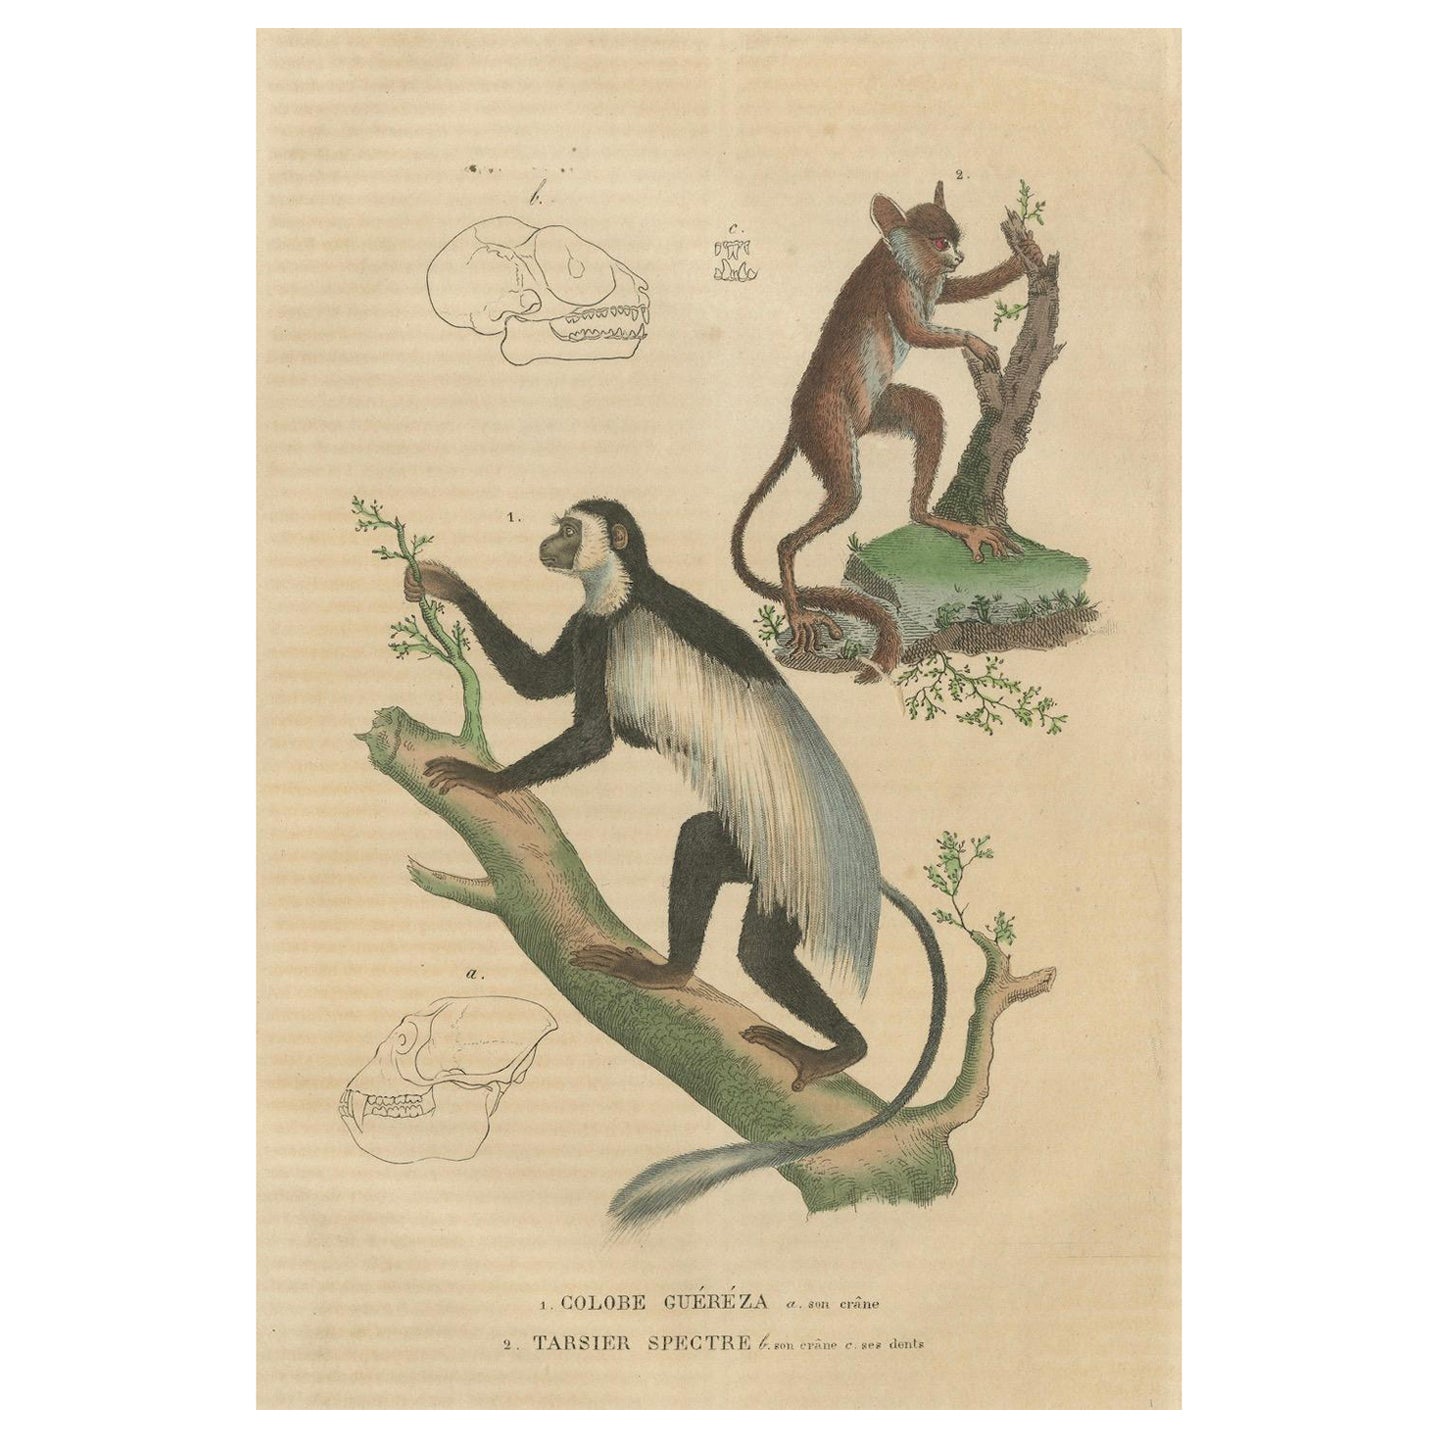 Arboreal Primates: The Eastern Black-and-White Colobus and Tarsier, 1845